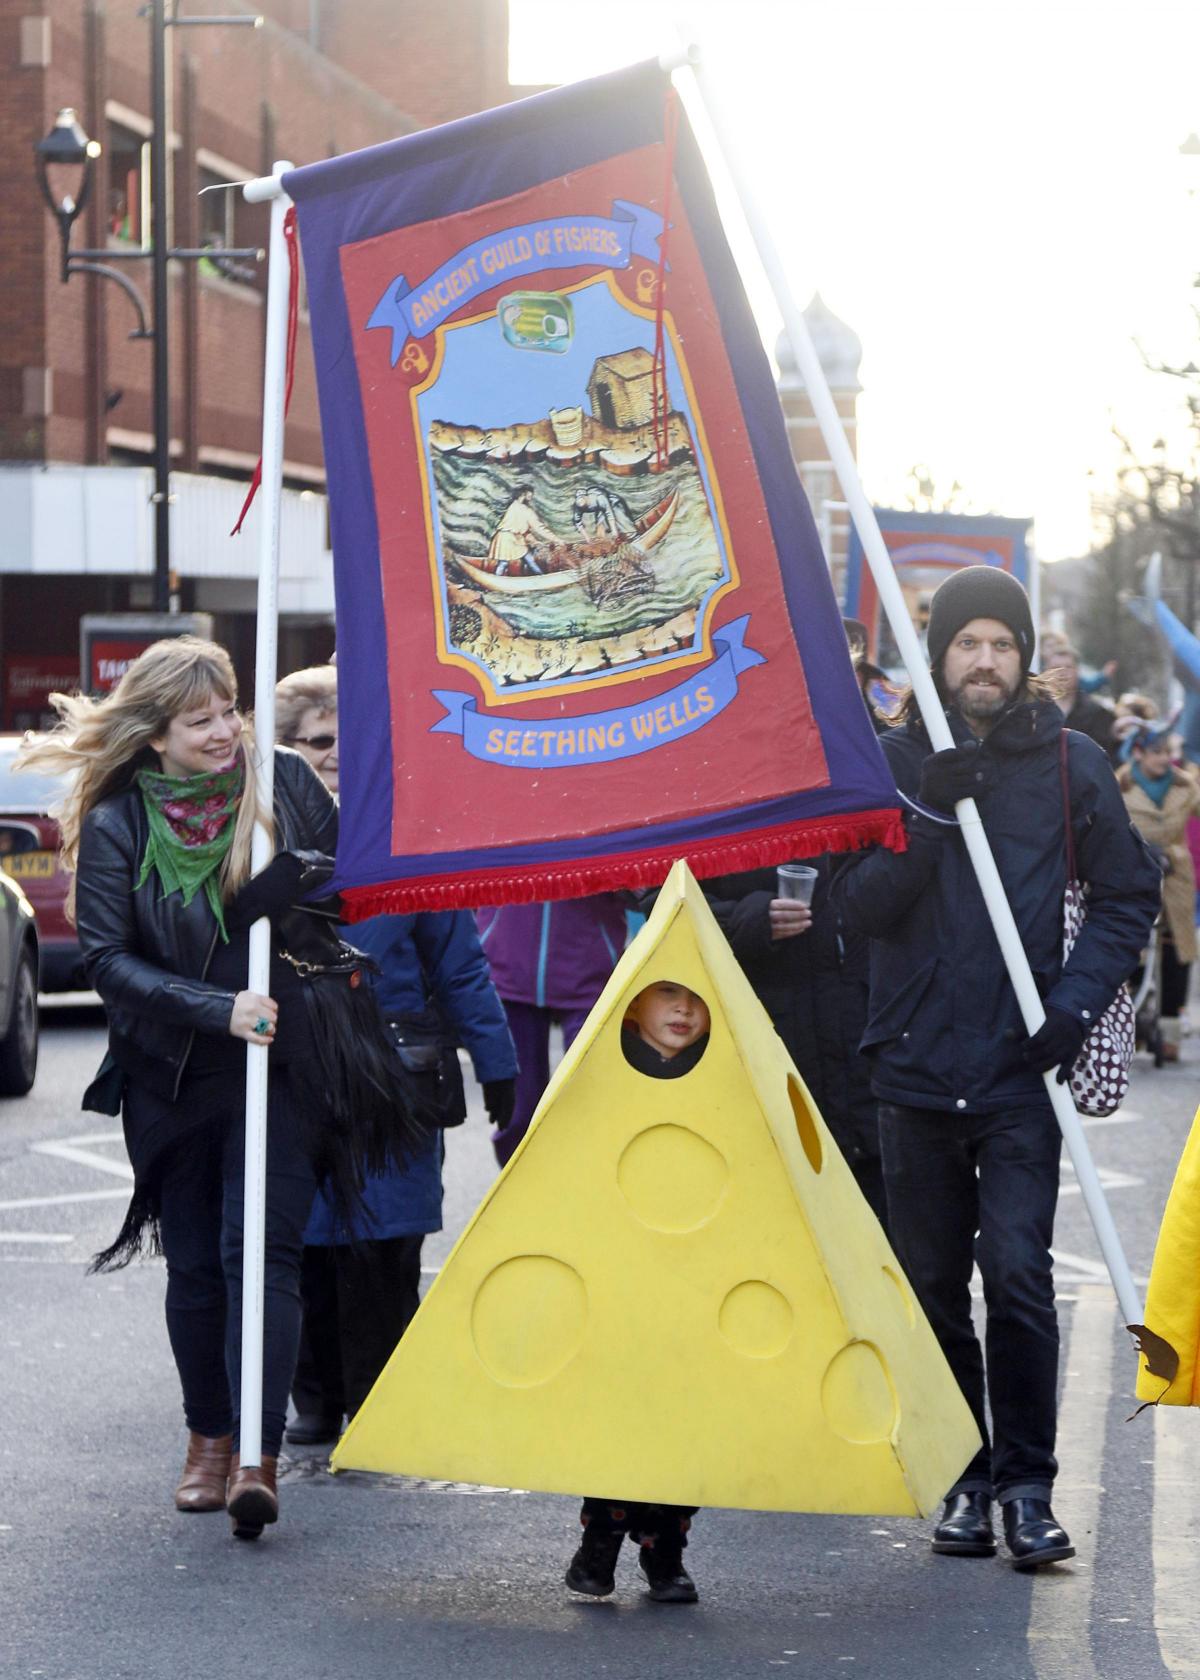 A wedge of cheese marches proudly under the banner of the Seething Wells Guild of Fishers